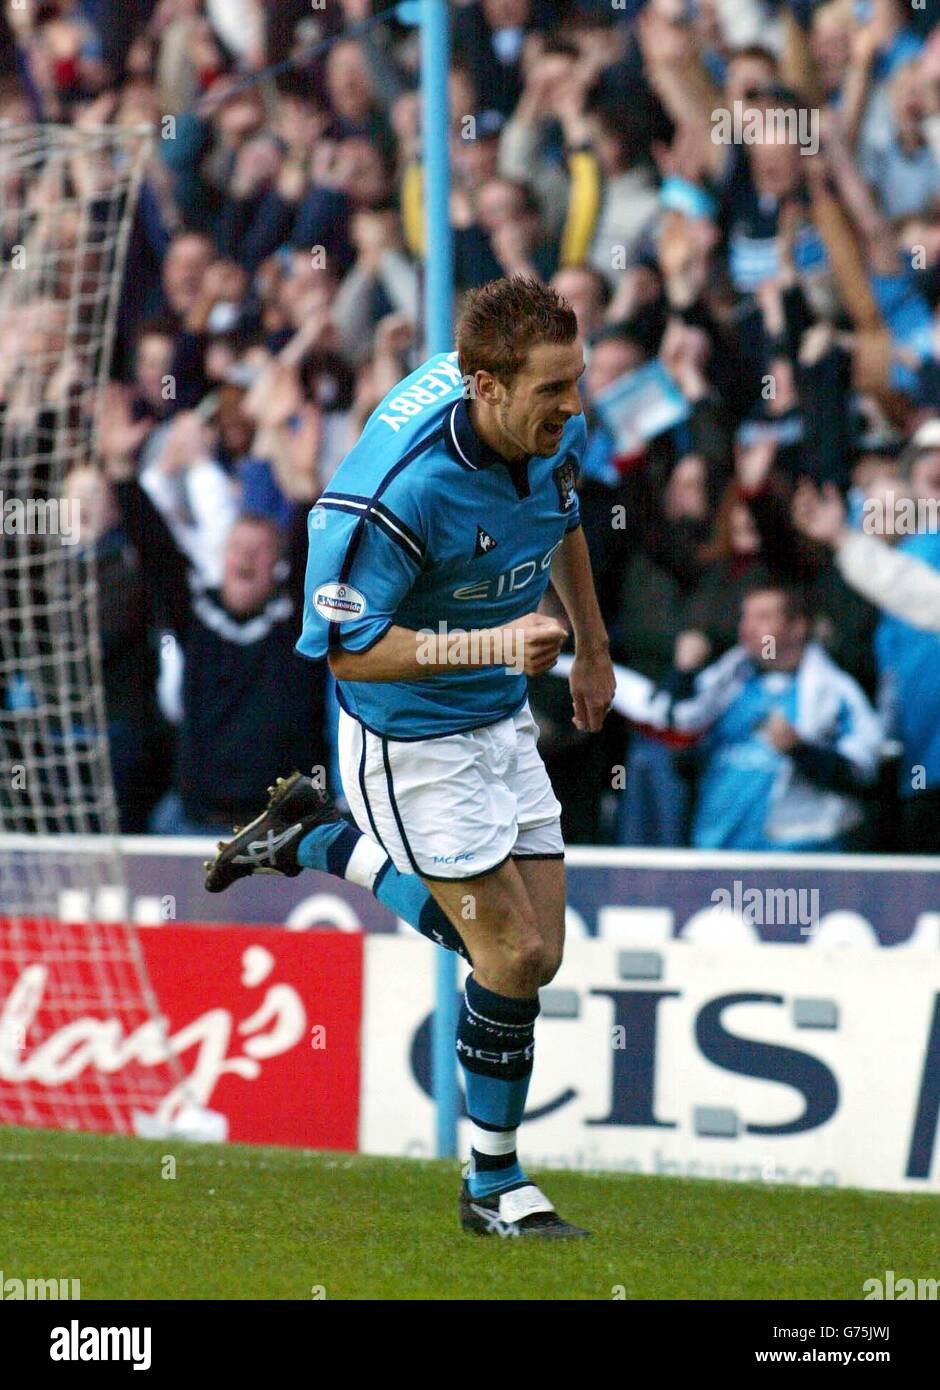 Manchester City's Darren Huckerby celebrates scoring a hat trick against Barnsley in his side's 5-1 win in their Nationwide Division One match at Manchester City's Maine Road stadium. NO UNOFFICIAL CLUB WEBSITE USE. Stock Photo